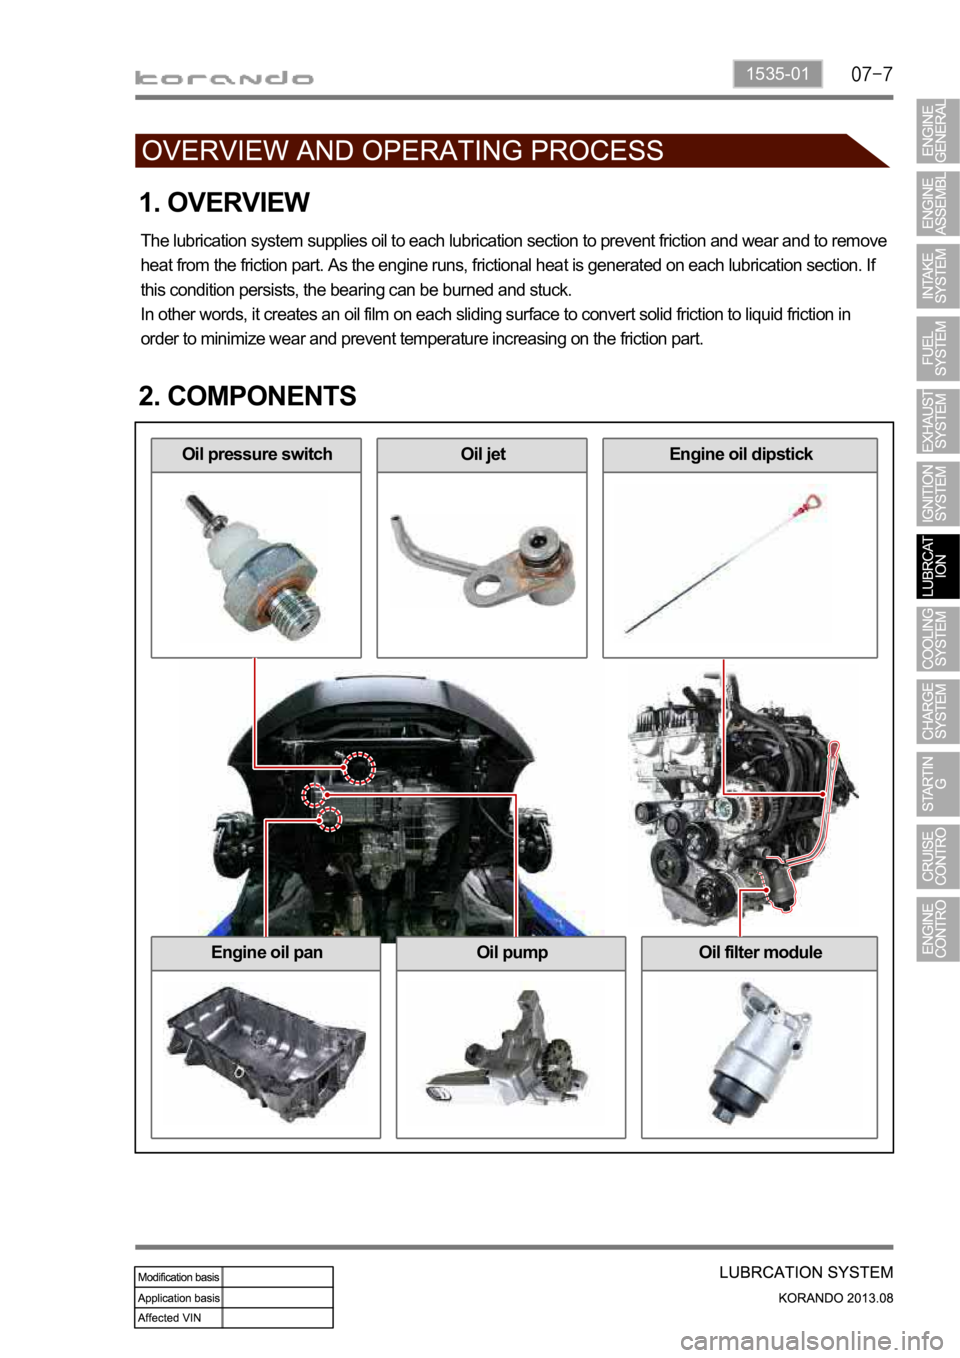 SSANGYONG KORANDO 2013  Service Manual 1535-01
Oil pressure switch
1. OVERVIEW
The lubrication system supplies oil to each lubrication section to prevent friction and wear and to remove 
heat from the friction part. As the engine runs, fri